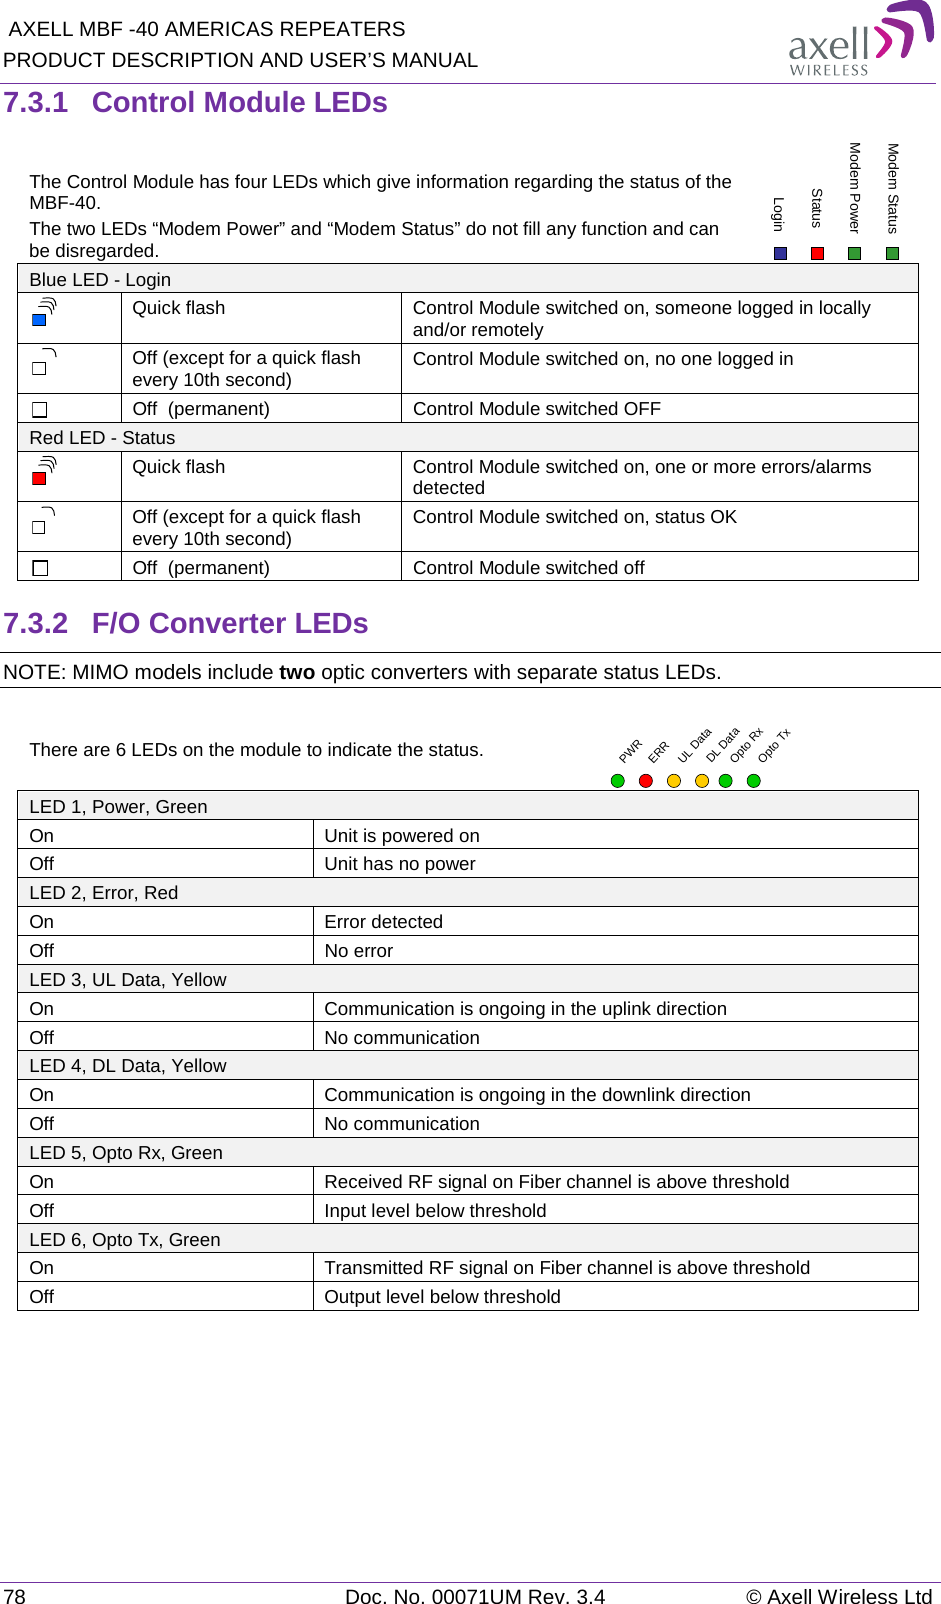  AXELL MBF -40 AMERICAS REPEATERS PRODUCT DESCRIPTION AND USER’S MANUAL 78 Doc. No. 00071UM Rev. 3.4 © Axell Wireless Ltd 7.3.1  Control Module LEDs The Control Module has four LEDs which give information regarding the status of the MBF-40.  The two LEDs “Modem Power” and “Modem Status” do not fill any function and can be disregarded.  Blue LED - Login  Quick flash Control Module switched on, someone logged in locally and/or remotely  Off (except for a quick flash every 10th second) Control Module switched on, no one logged in   Off  (permanent) Control Module switched OFF Red LED - Status  Quick flash Control Module switched on, one or more errors/alarms detected  Off (except for a quick flash every 10th second) Control Module switched on, status OK  Off  (permanent) Control Module switched off 7.3.2  F/O Converter LEDs NOTE: MIMO models include two optic converters with separate status LEDs. There are 6 LEDs on the module to indicate the status.            LED 1, Power, Green  On Unit is powered on Off Unit has no power LED 2, Error, Red On Error detected Off No error LED 3, UL Data, Yellow On Communication is ongoing in the uplink direction Off No communication LED 4, DL Data, Yellow On Communication is ongoing in the downlink direction Off No communication LED 5, Opto Rx, Green On Received RF signal on Fiber channel is above threshold Off Input level below threshold LED 6, Opto Tx, Green On Transmitted RF signal on Fiber channel is above threshold Off Output level below threshold    Modem StatusModem PowerStatusLoginPWRERRUL DataDL DataOpto RxOpto Tx